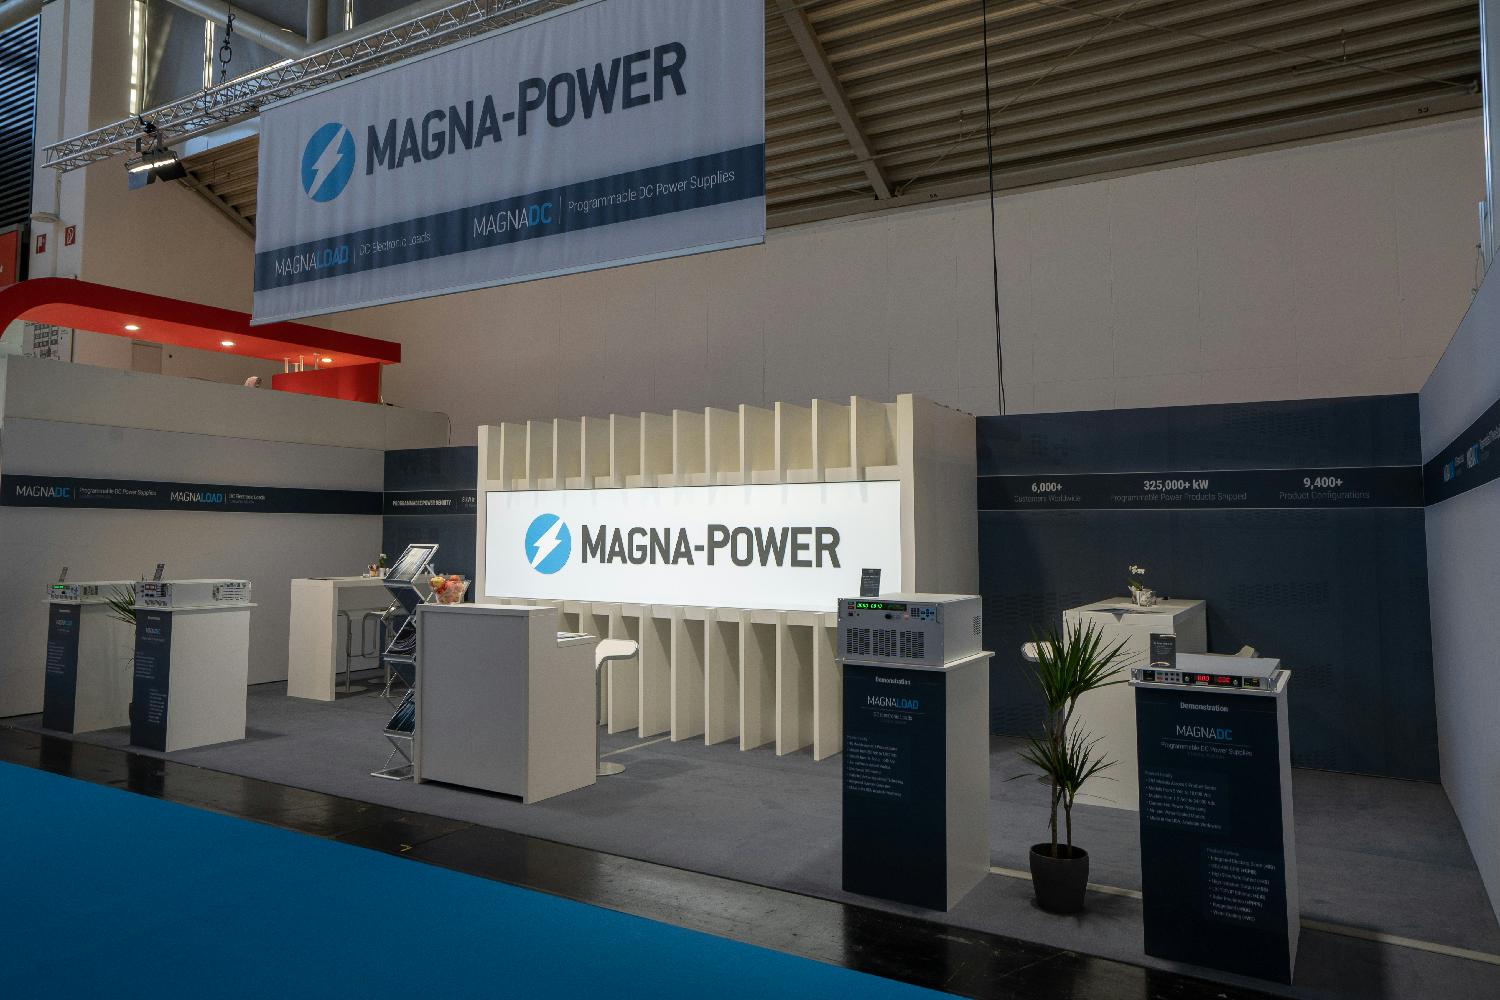 Magna-Power's exhibition at electronica 2018 in Munich, Germany.